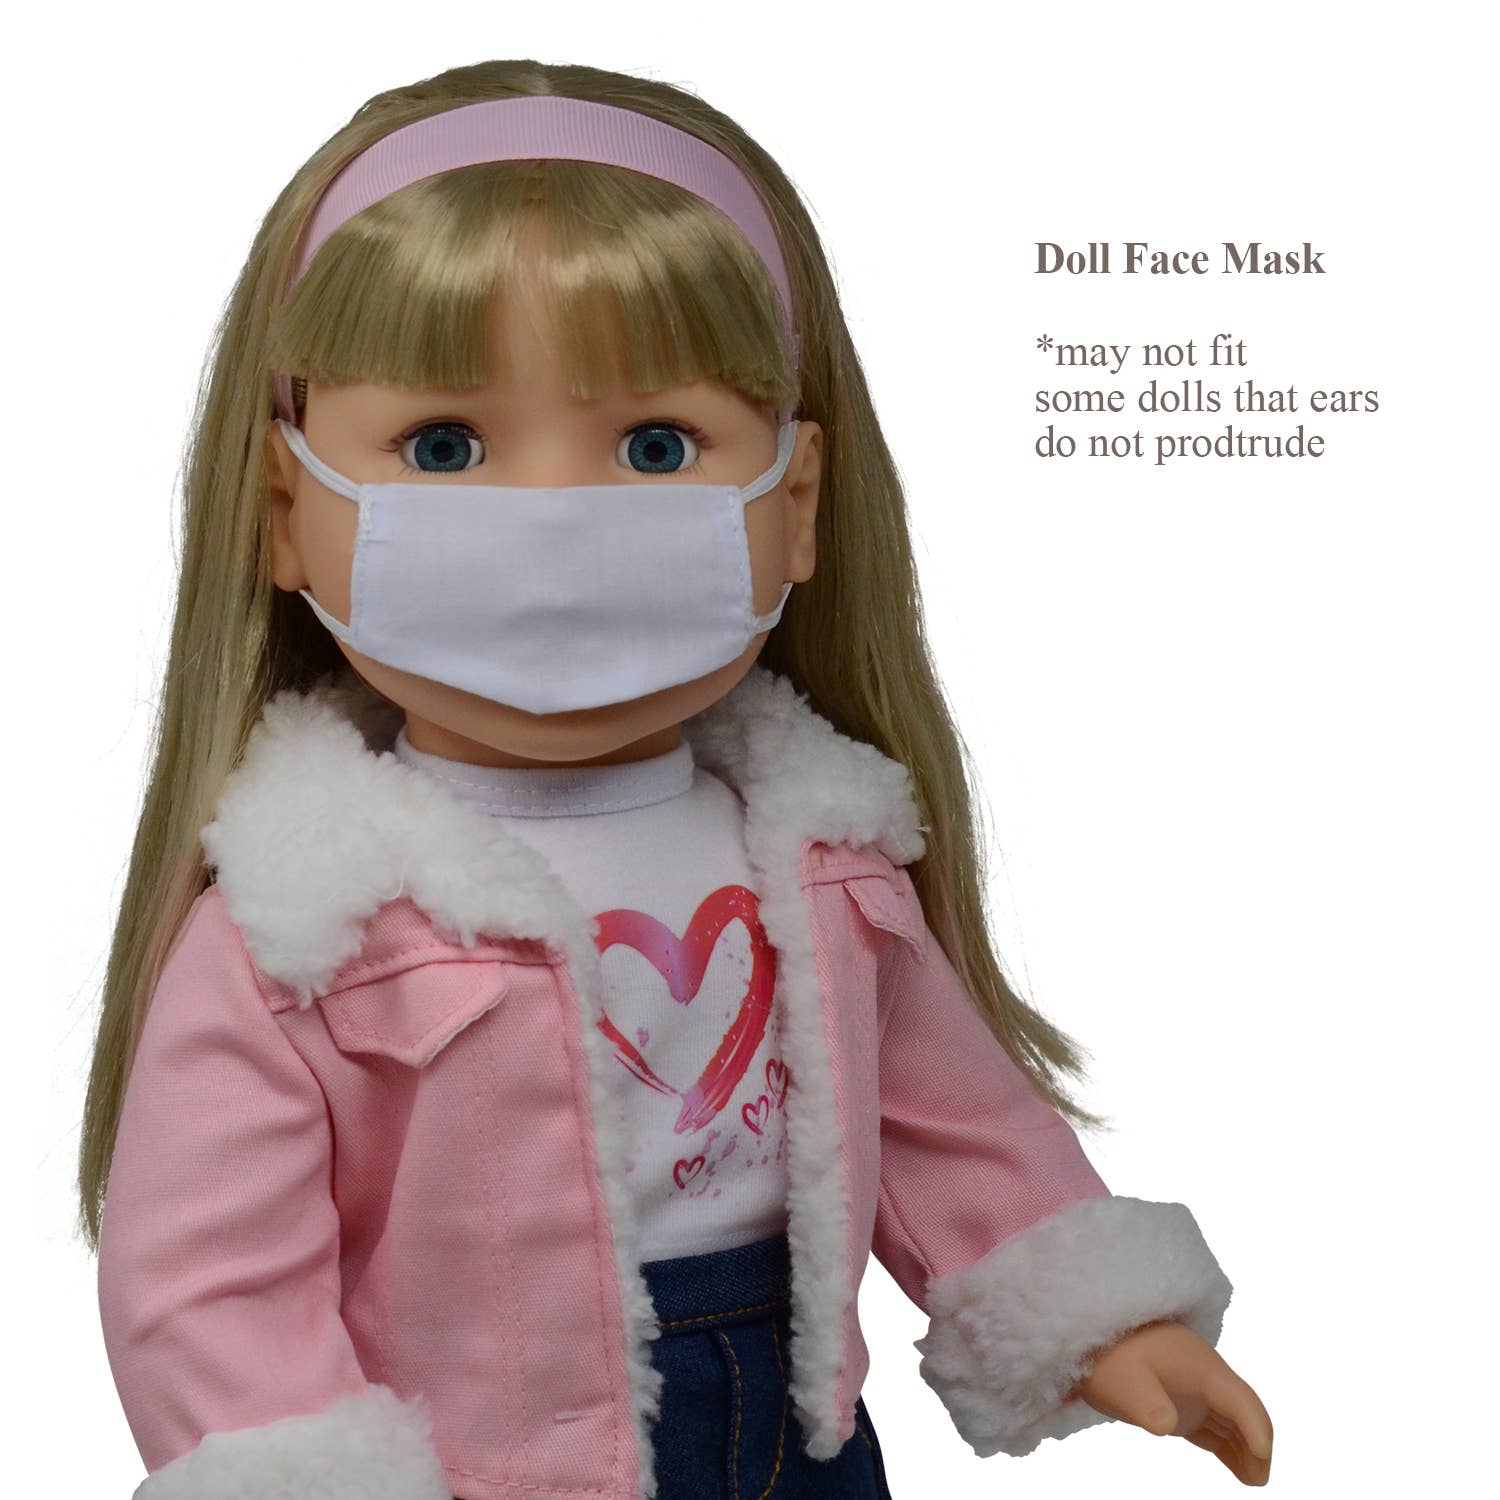 Doll Masks and Face Shields